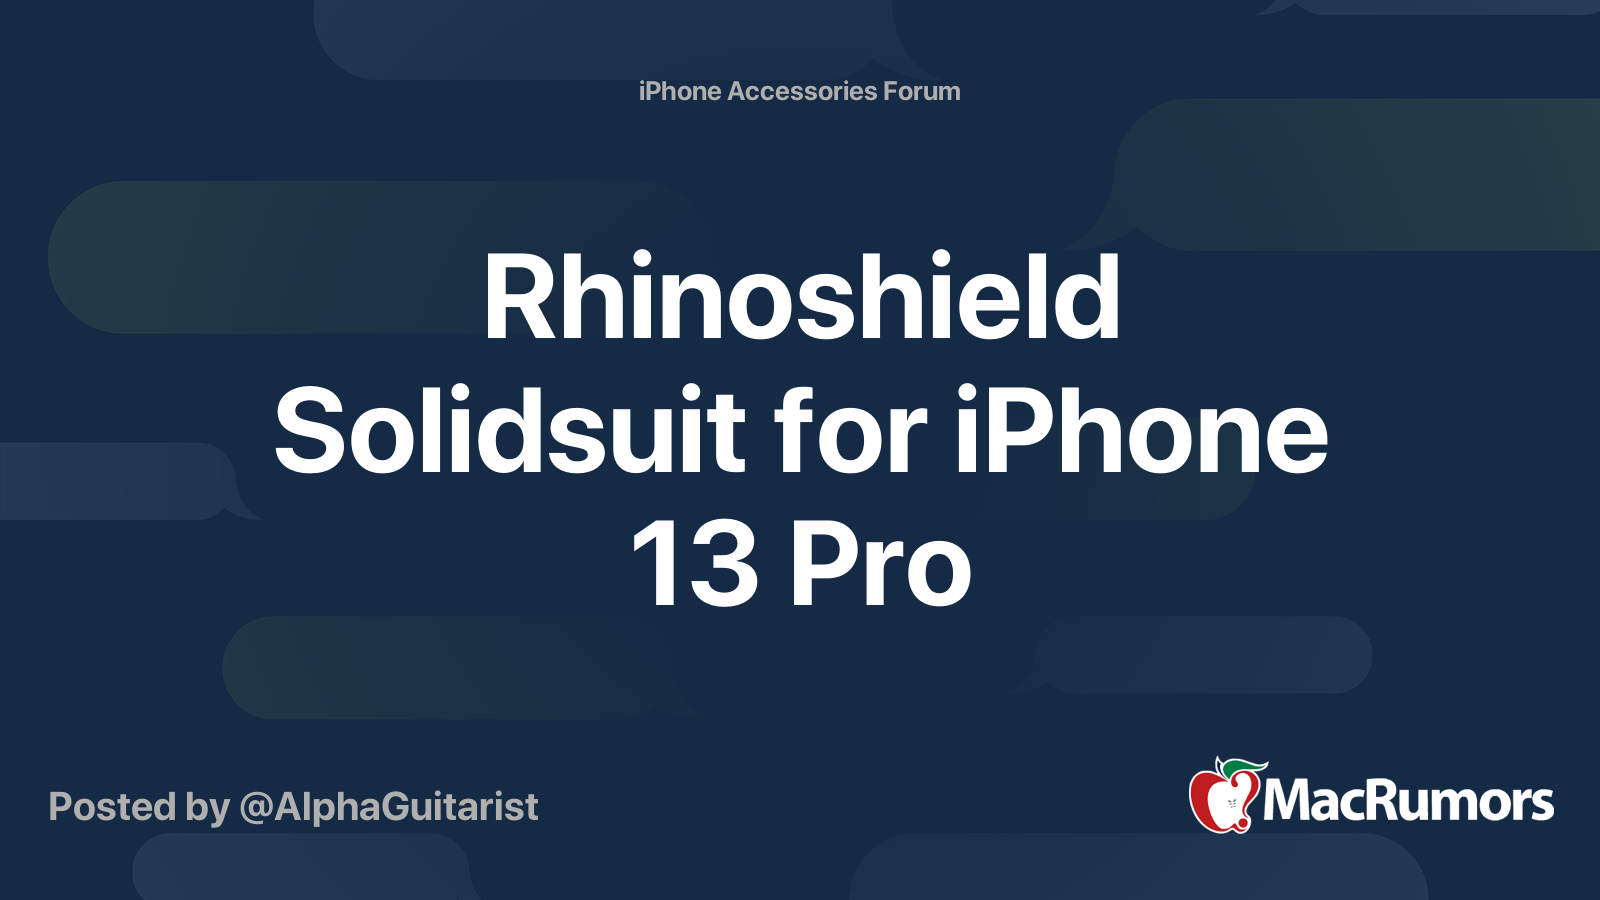 Rhinoshield Solidsuit for iPhone 13 Pro